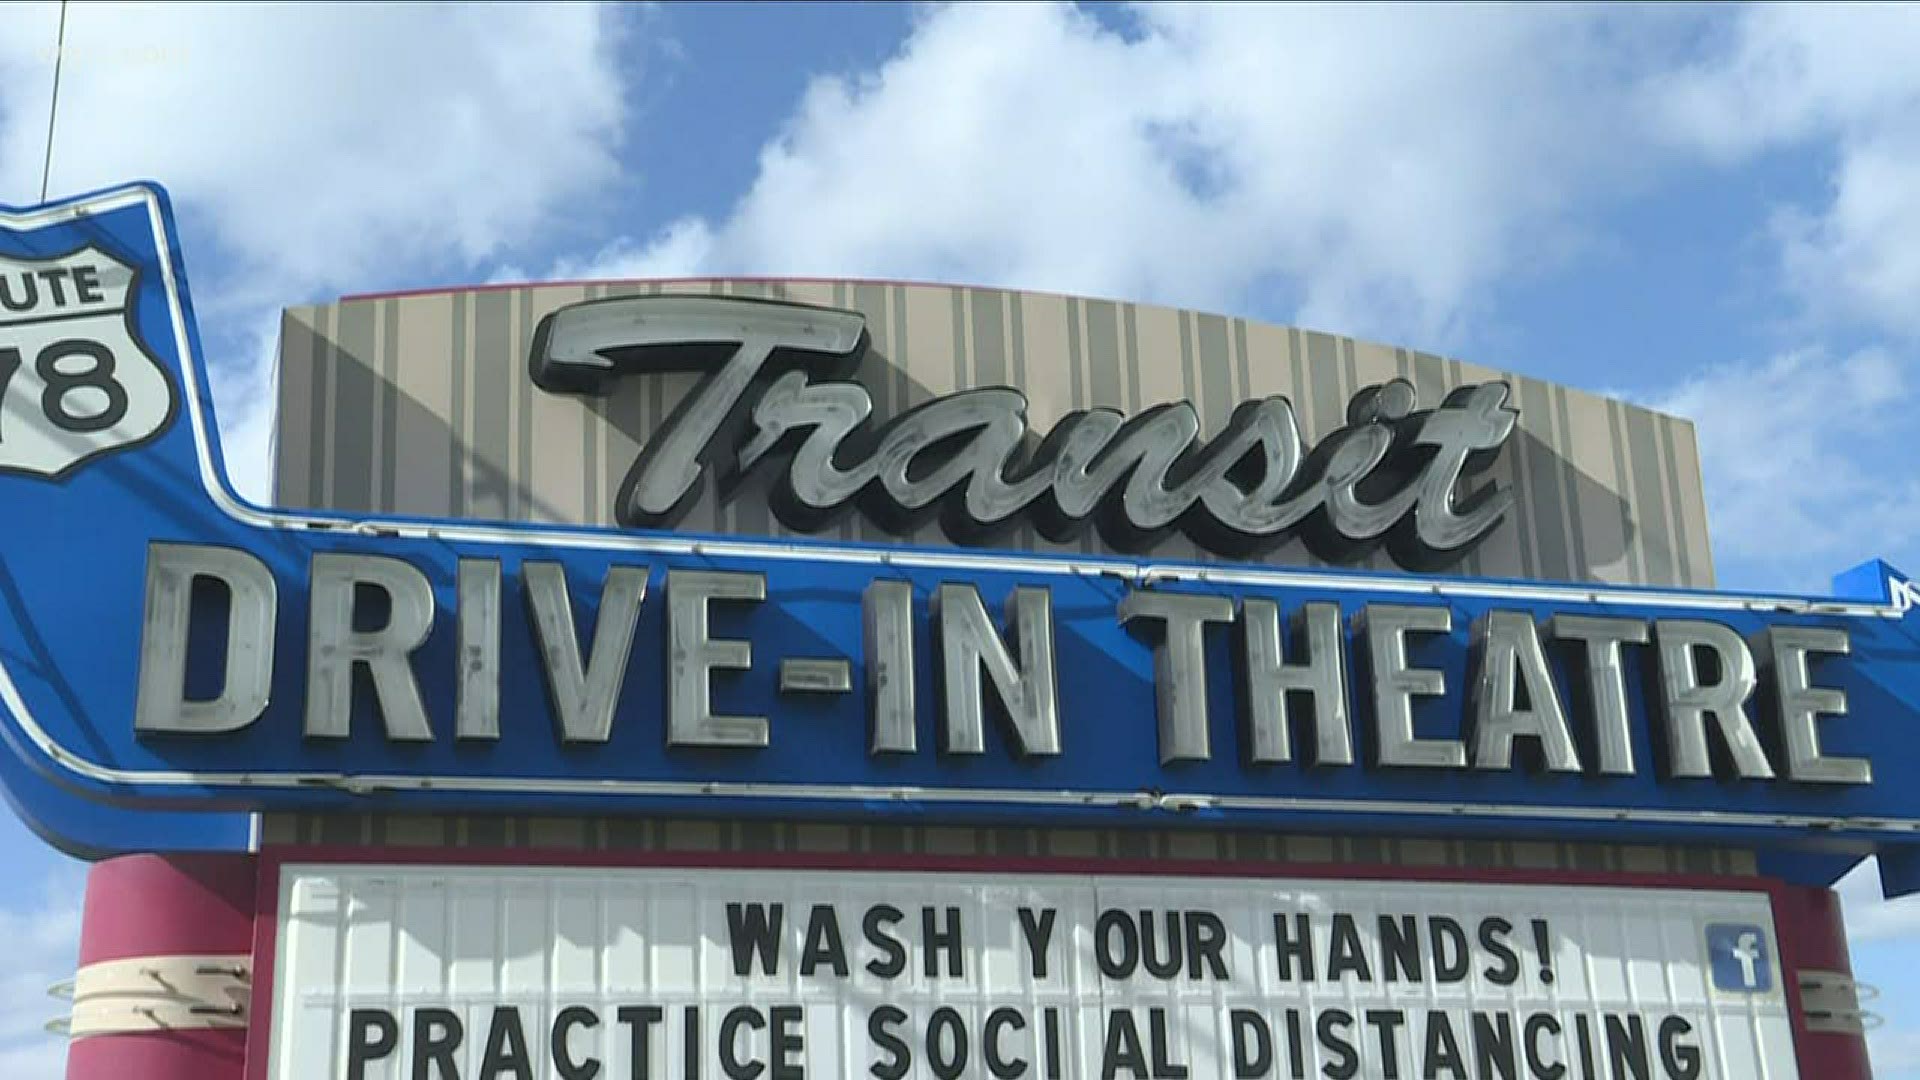 “Unleash the Superhero Within” at Transit Theatre Drive-In